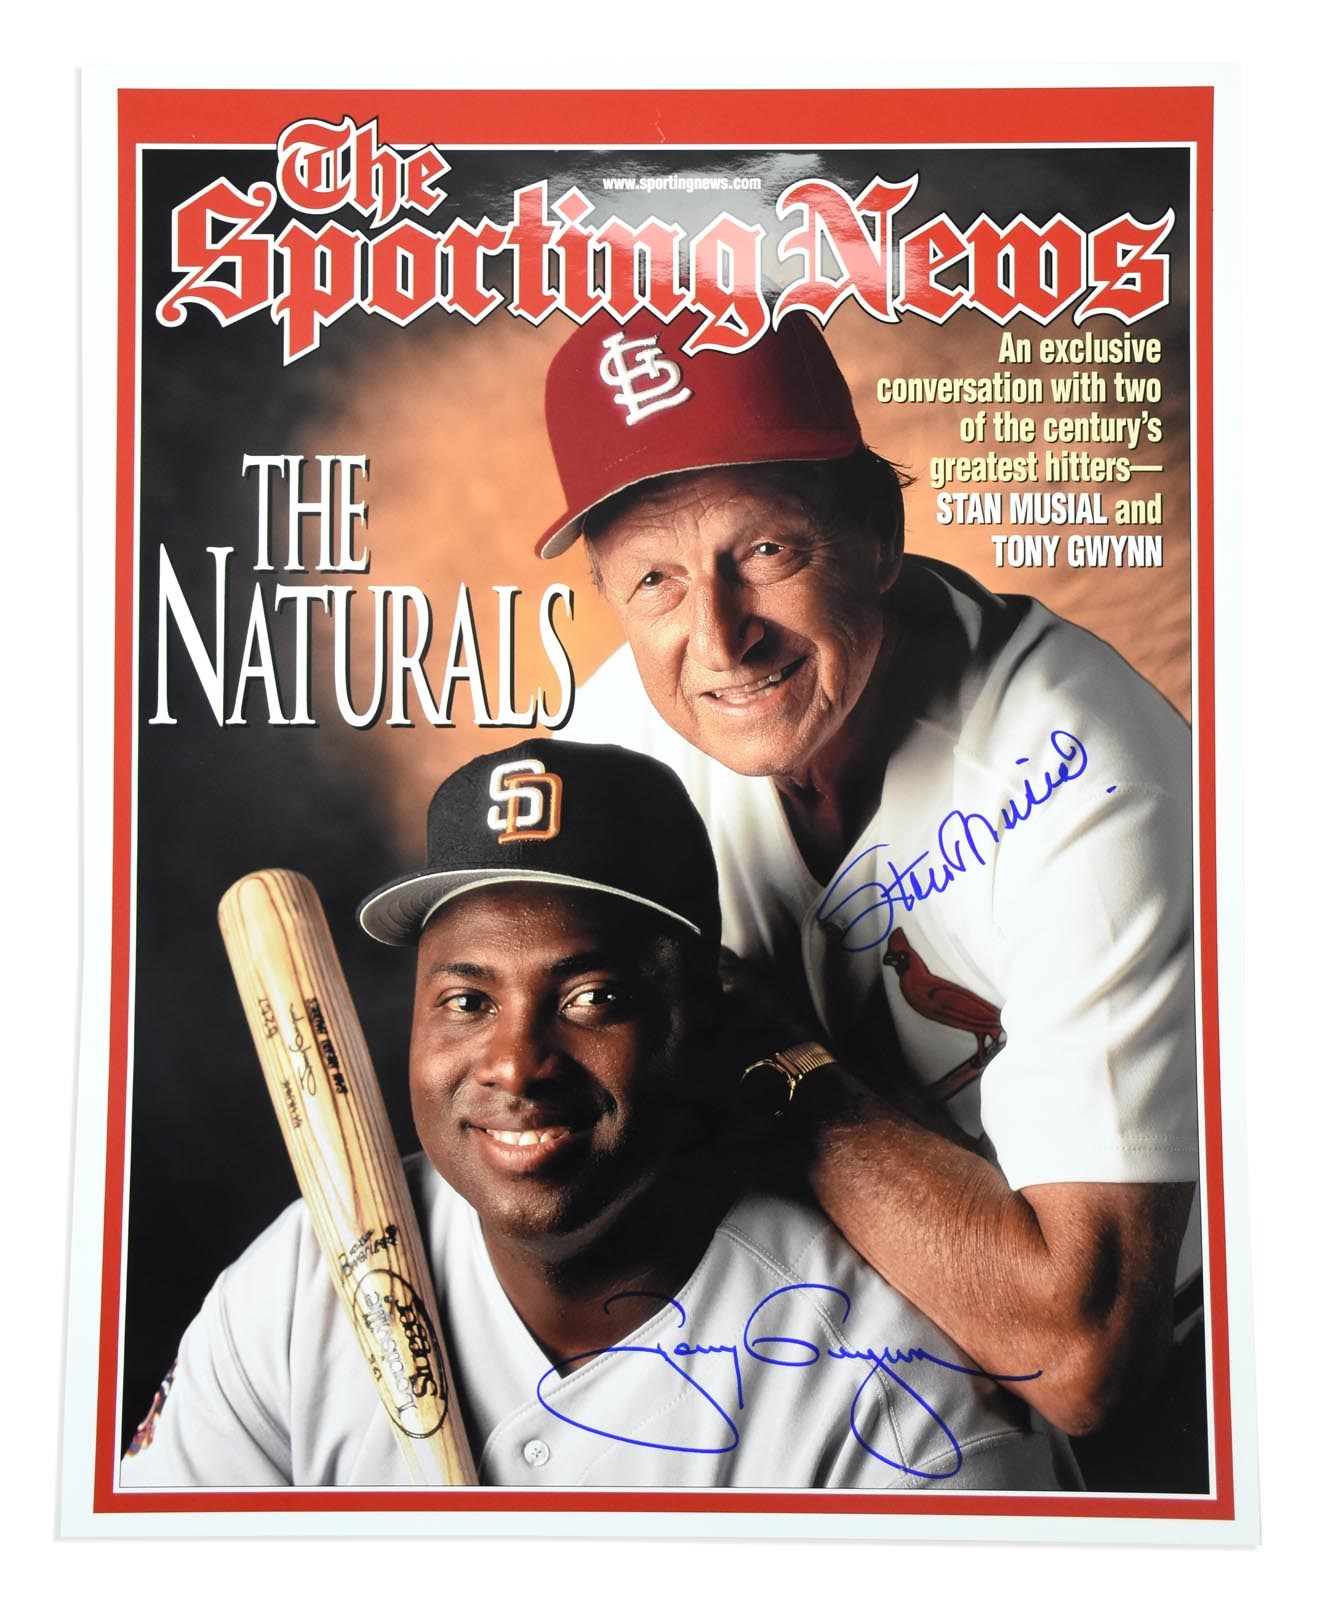 Tony Gwynn & Stan Musial Signed "The Naturals" 16 x 20" Photograph